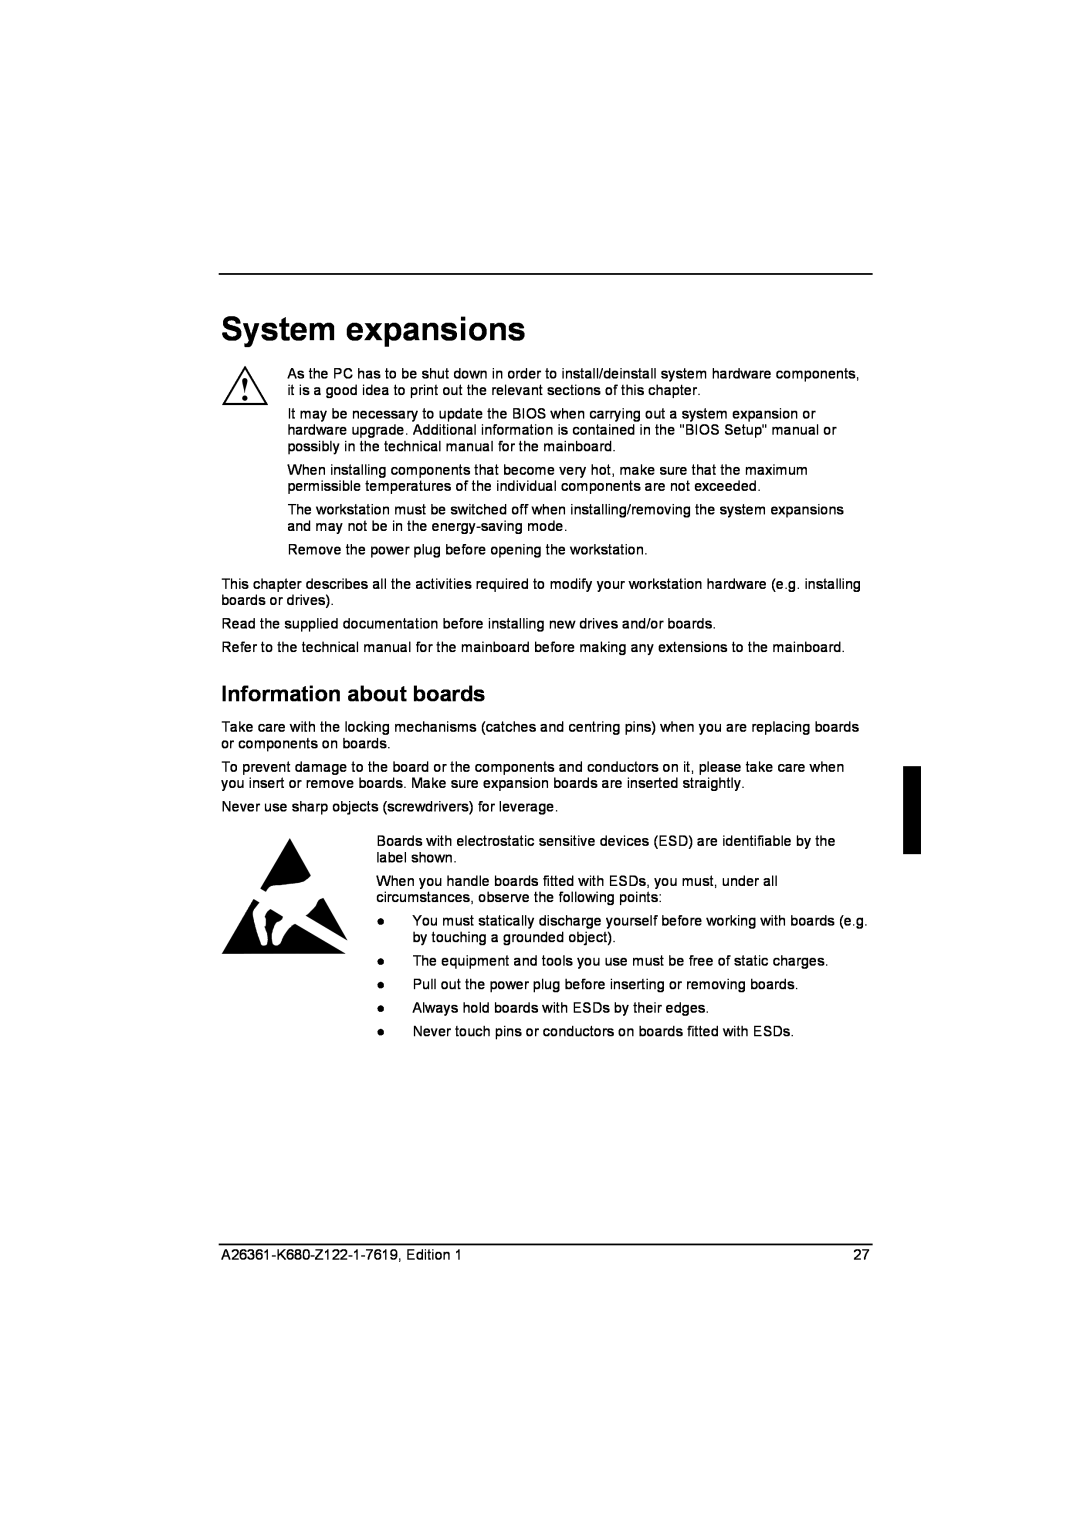 Fujitsu R630, V810 manual System expansions, Information about boards 